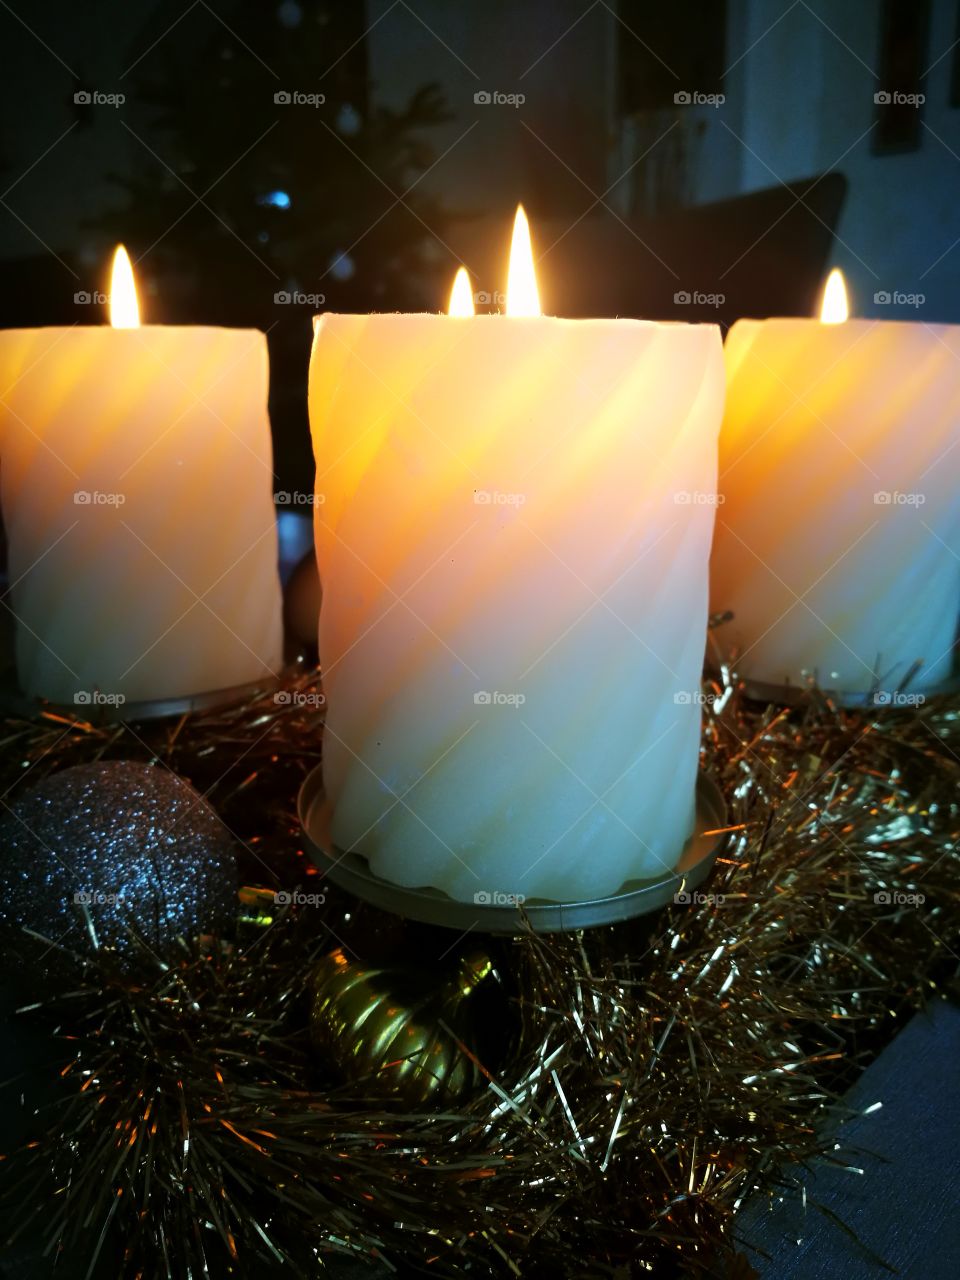 Advent candles